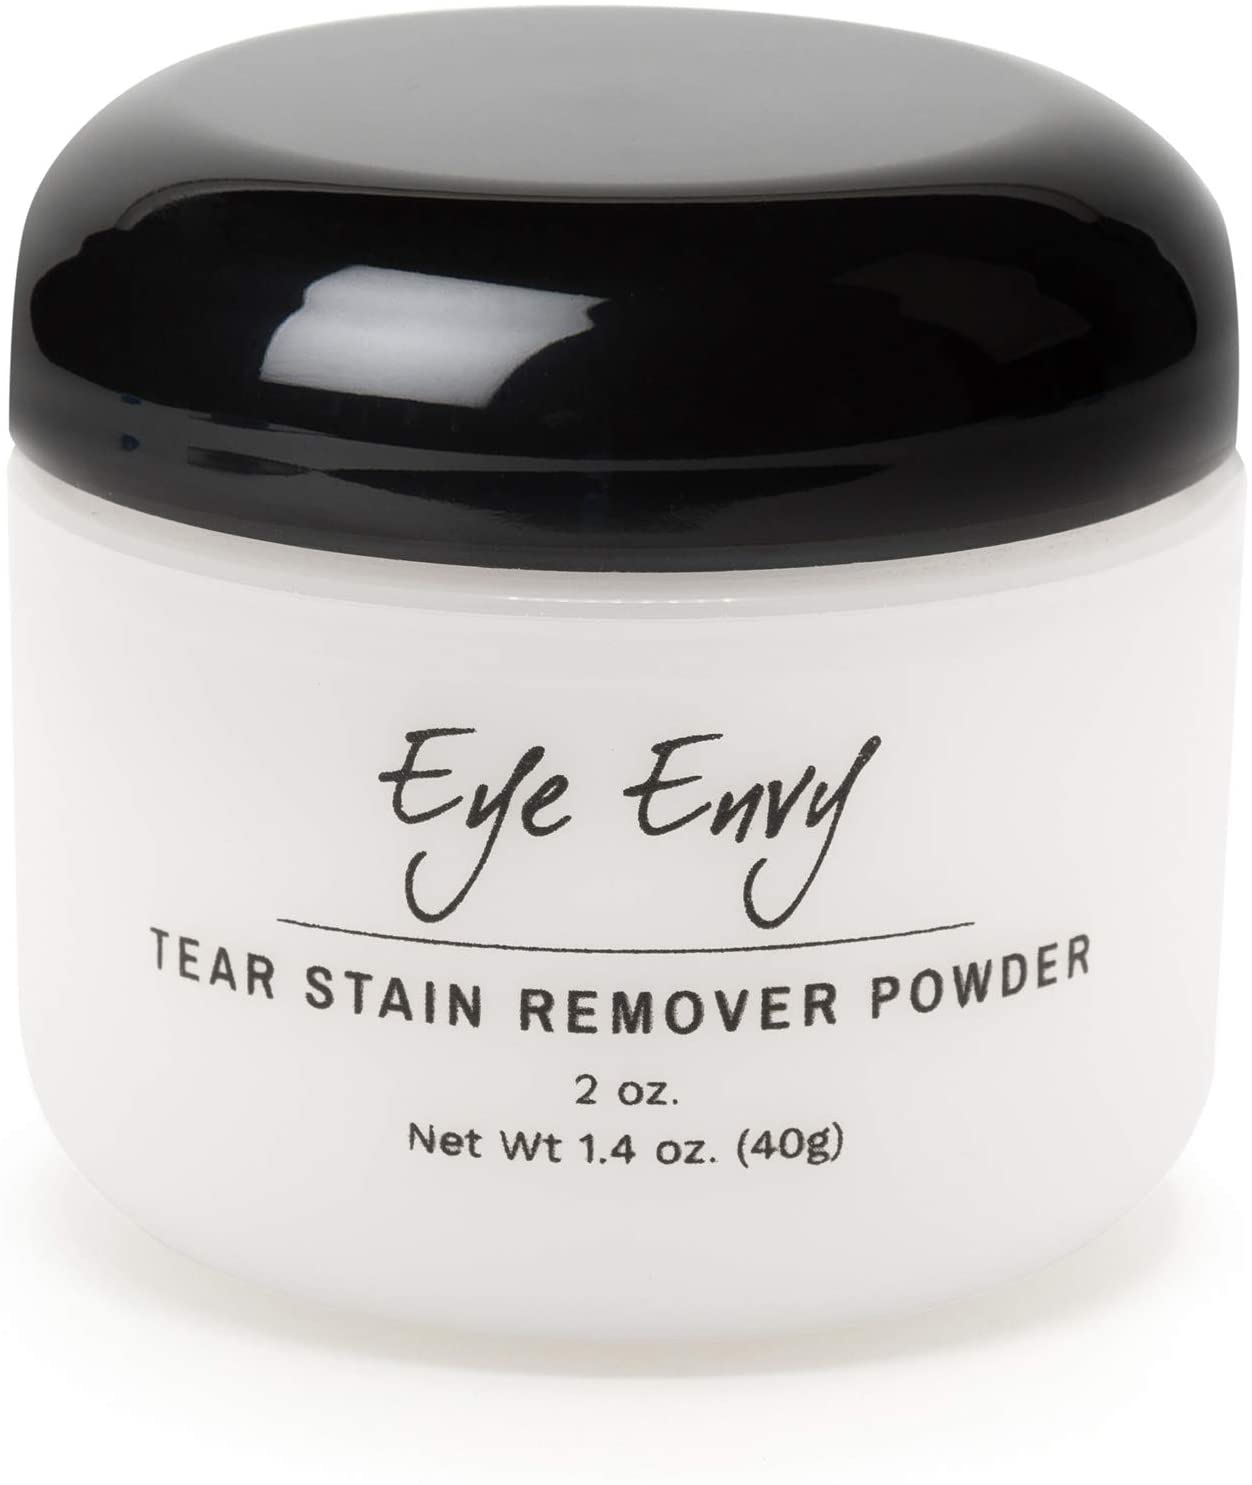 Eye Envy Tear Stain Remover Powder for Dogs and Cats|100% Natural, Safe|Apply Around Eyes|Absorbs and Repels Tears|Keeps Area Dry|Treats The Cause of Staining|Effective and Non-irritating, 2oz - (For 8 piece(s))